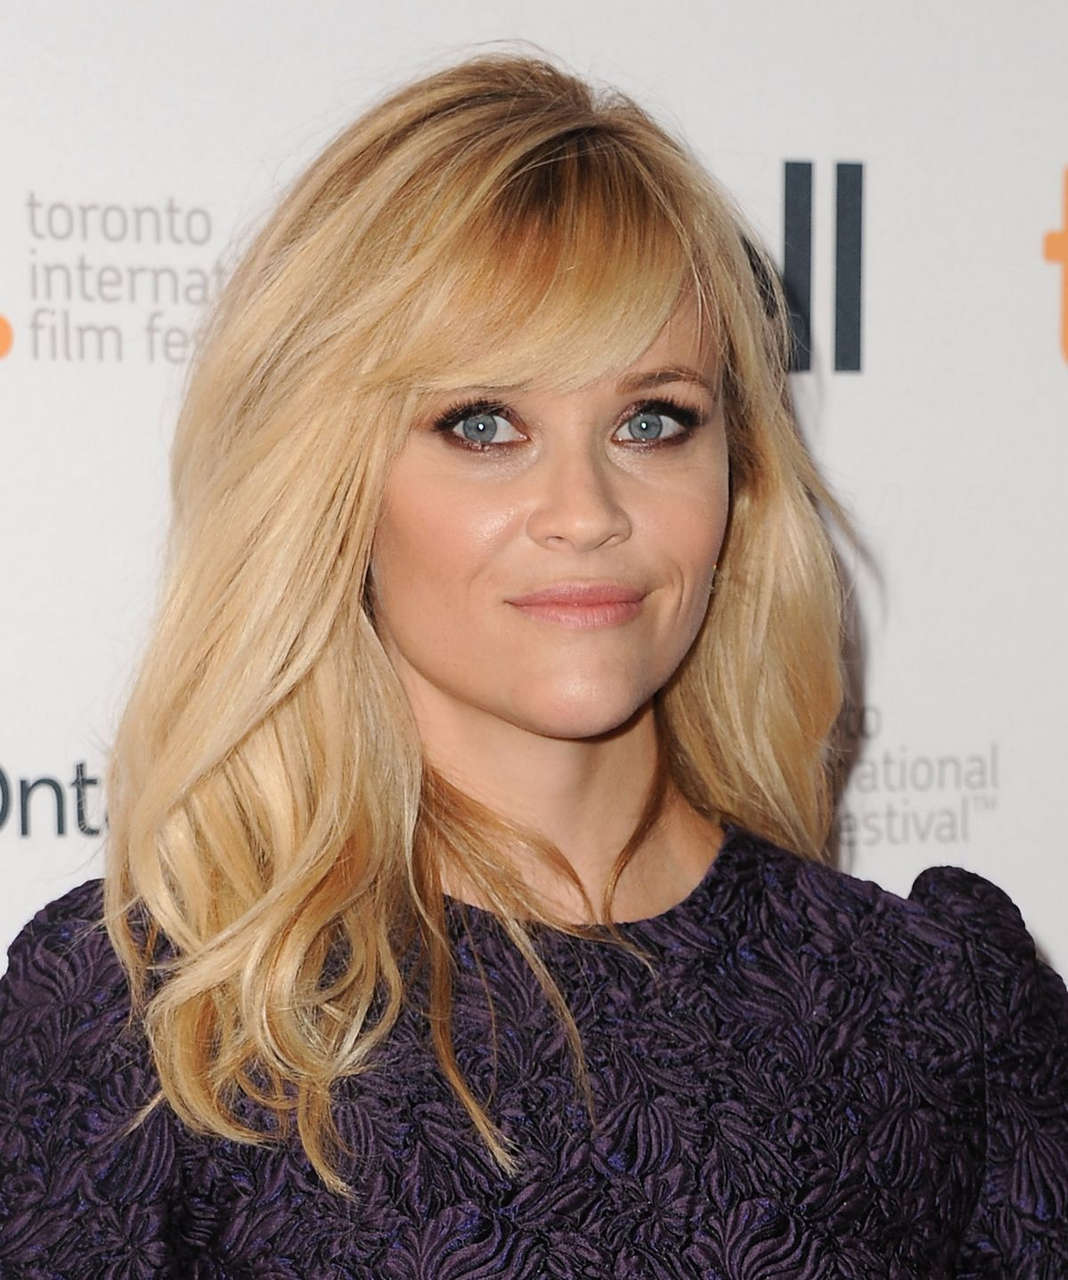 Reese Witherspoon Good Lie Premiere Toronto